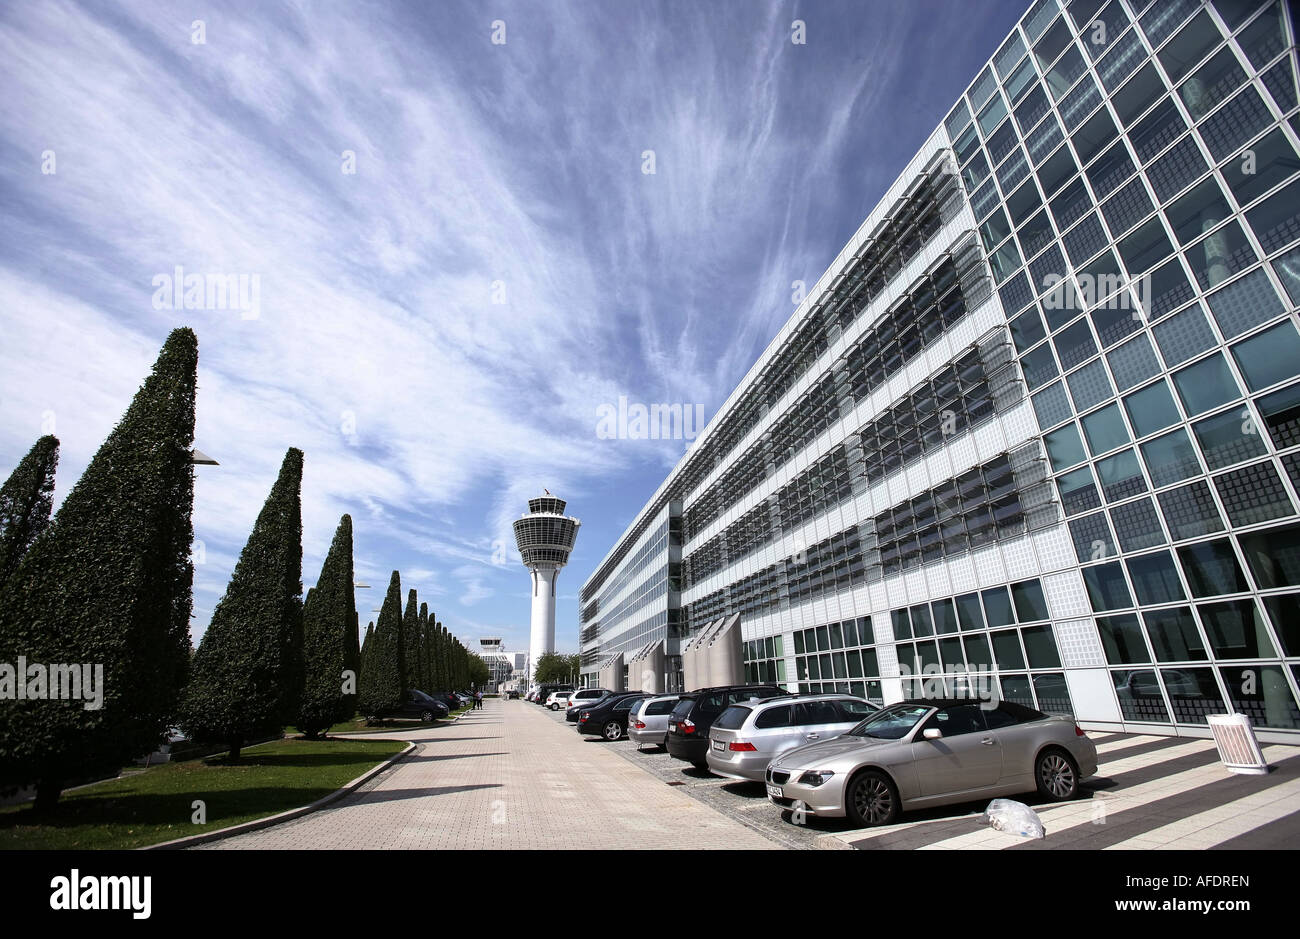 Illustration Airport: Munich Airport exterior view with tower, trees and office buildings Stock Photo